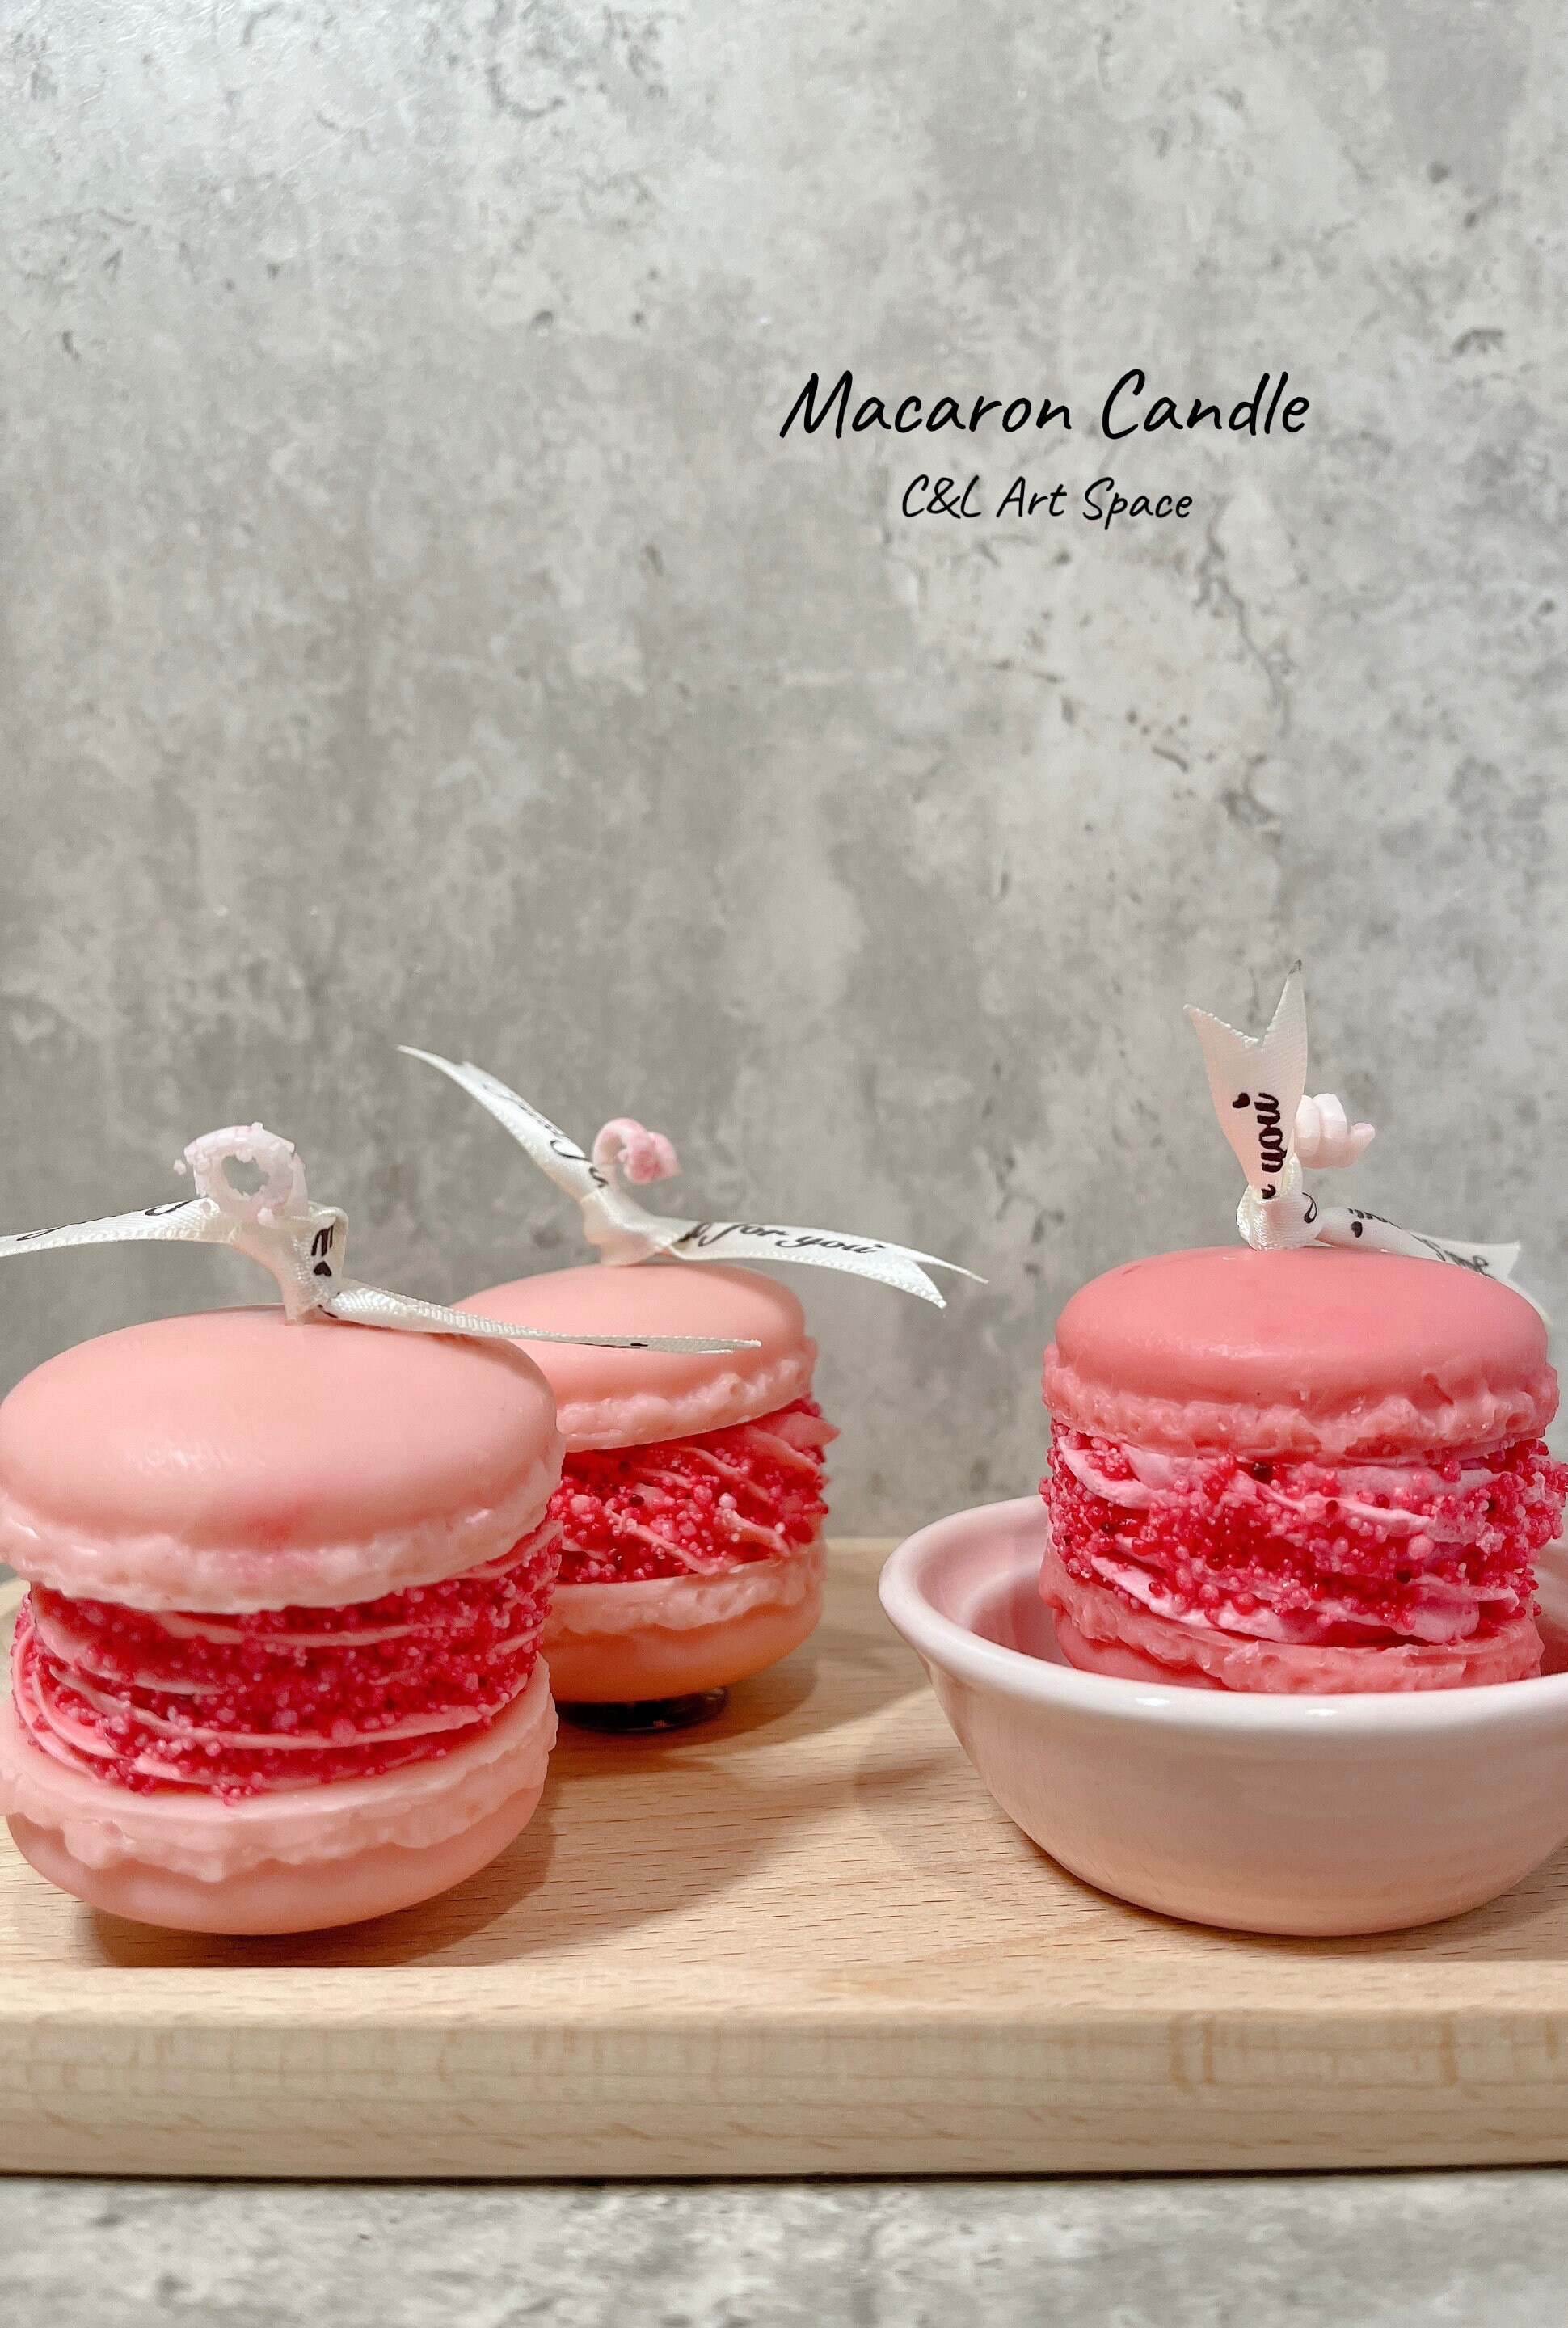 UPFLICK Cupcake Candle Macarons Cute Birthday Gifts for Women Home  Decorative Cake Scented Pink Candle Funny Unique Couple Gift Wedding Favors